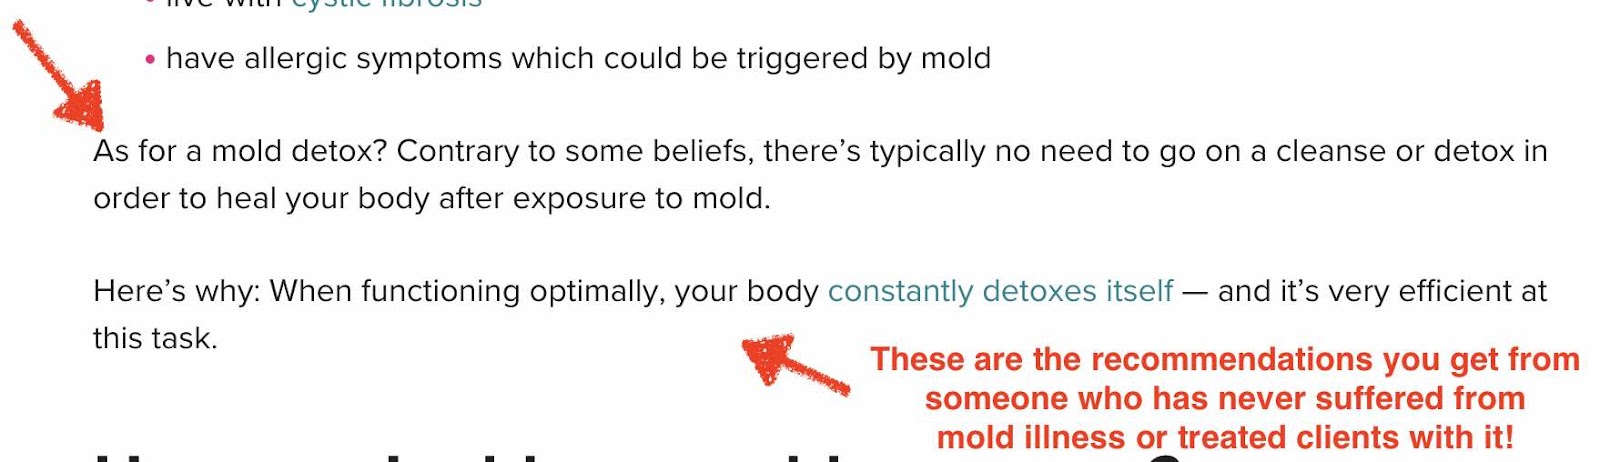 Screenshot of an expert who doesn't understand mycotoxin toxiicty or what mold detox symptoms are. 